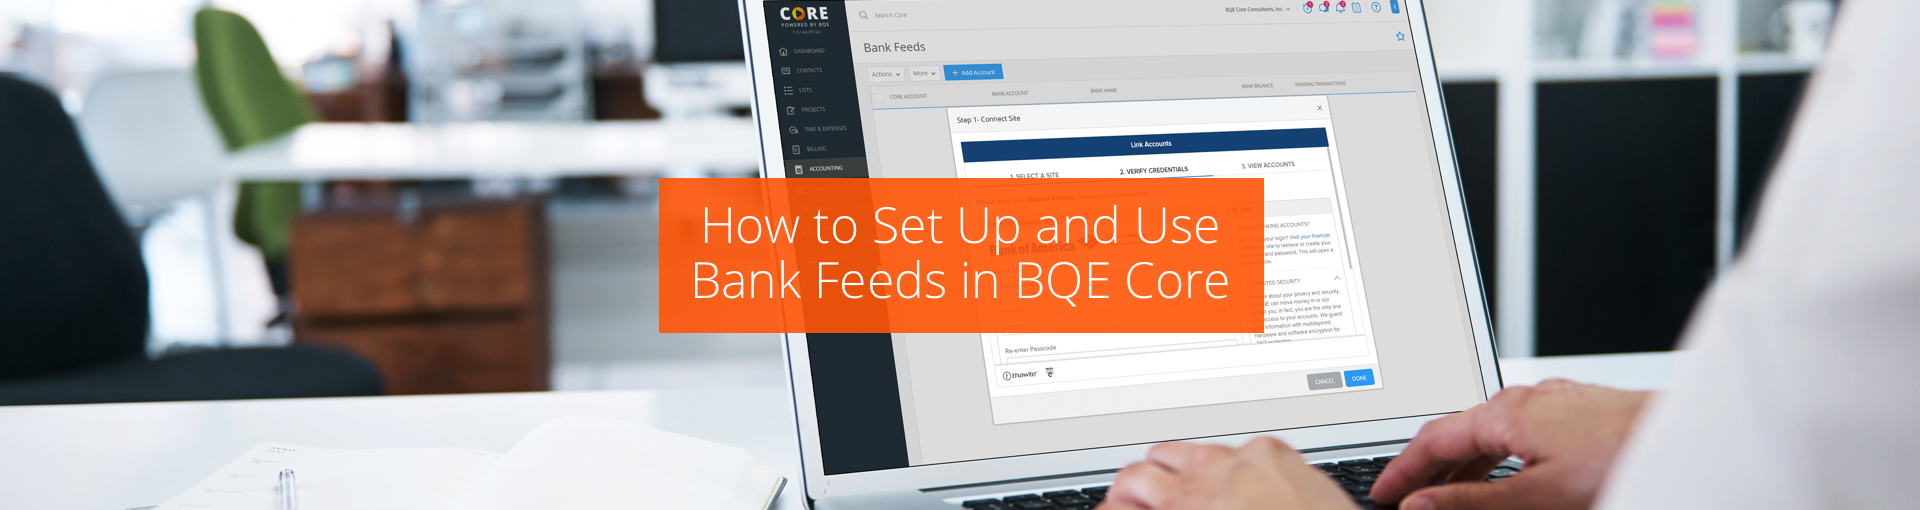 How to Set Up and Use Bank Feeds in BQE CORE Featured Image